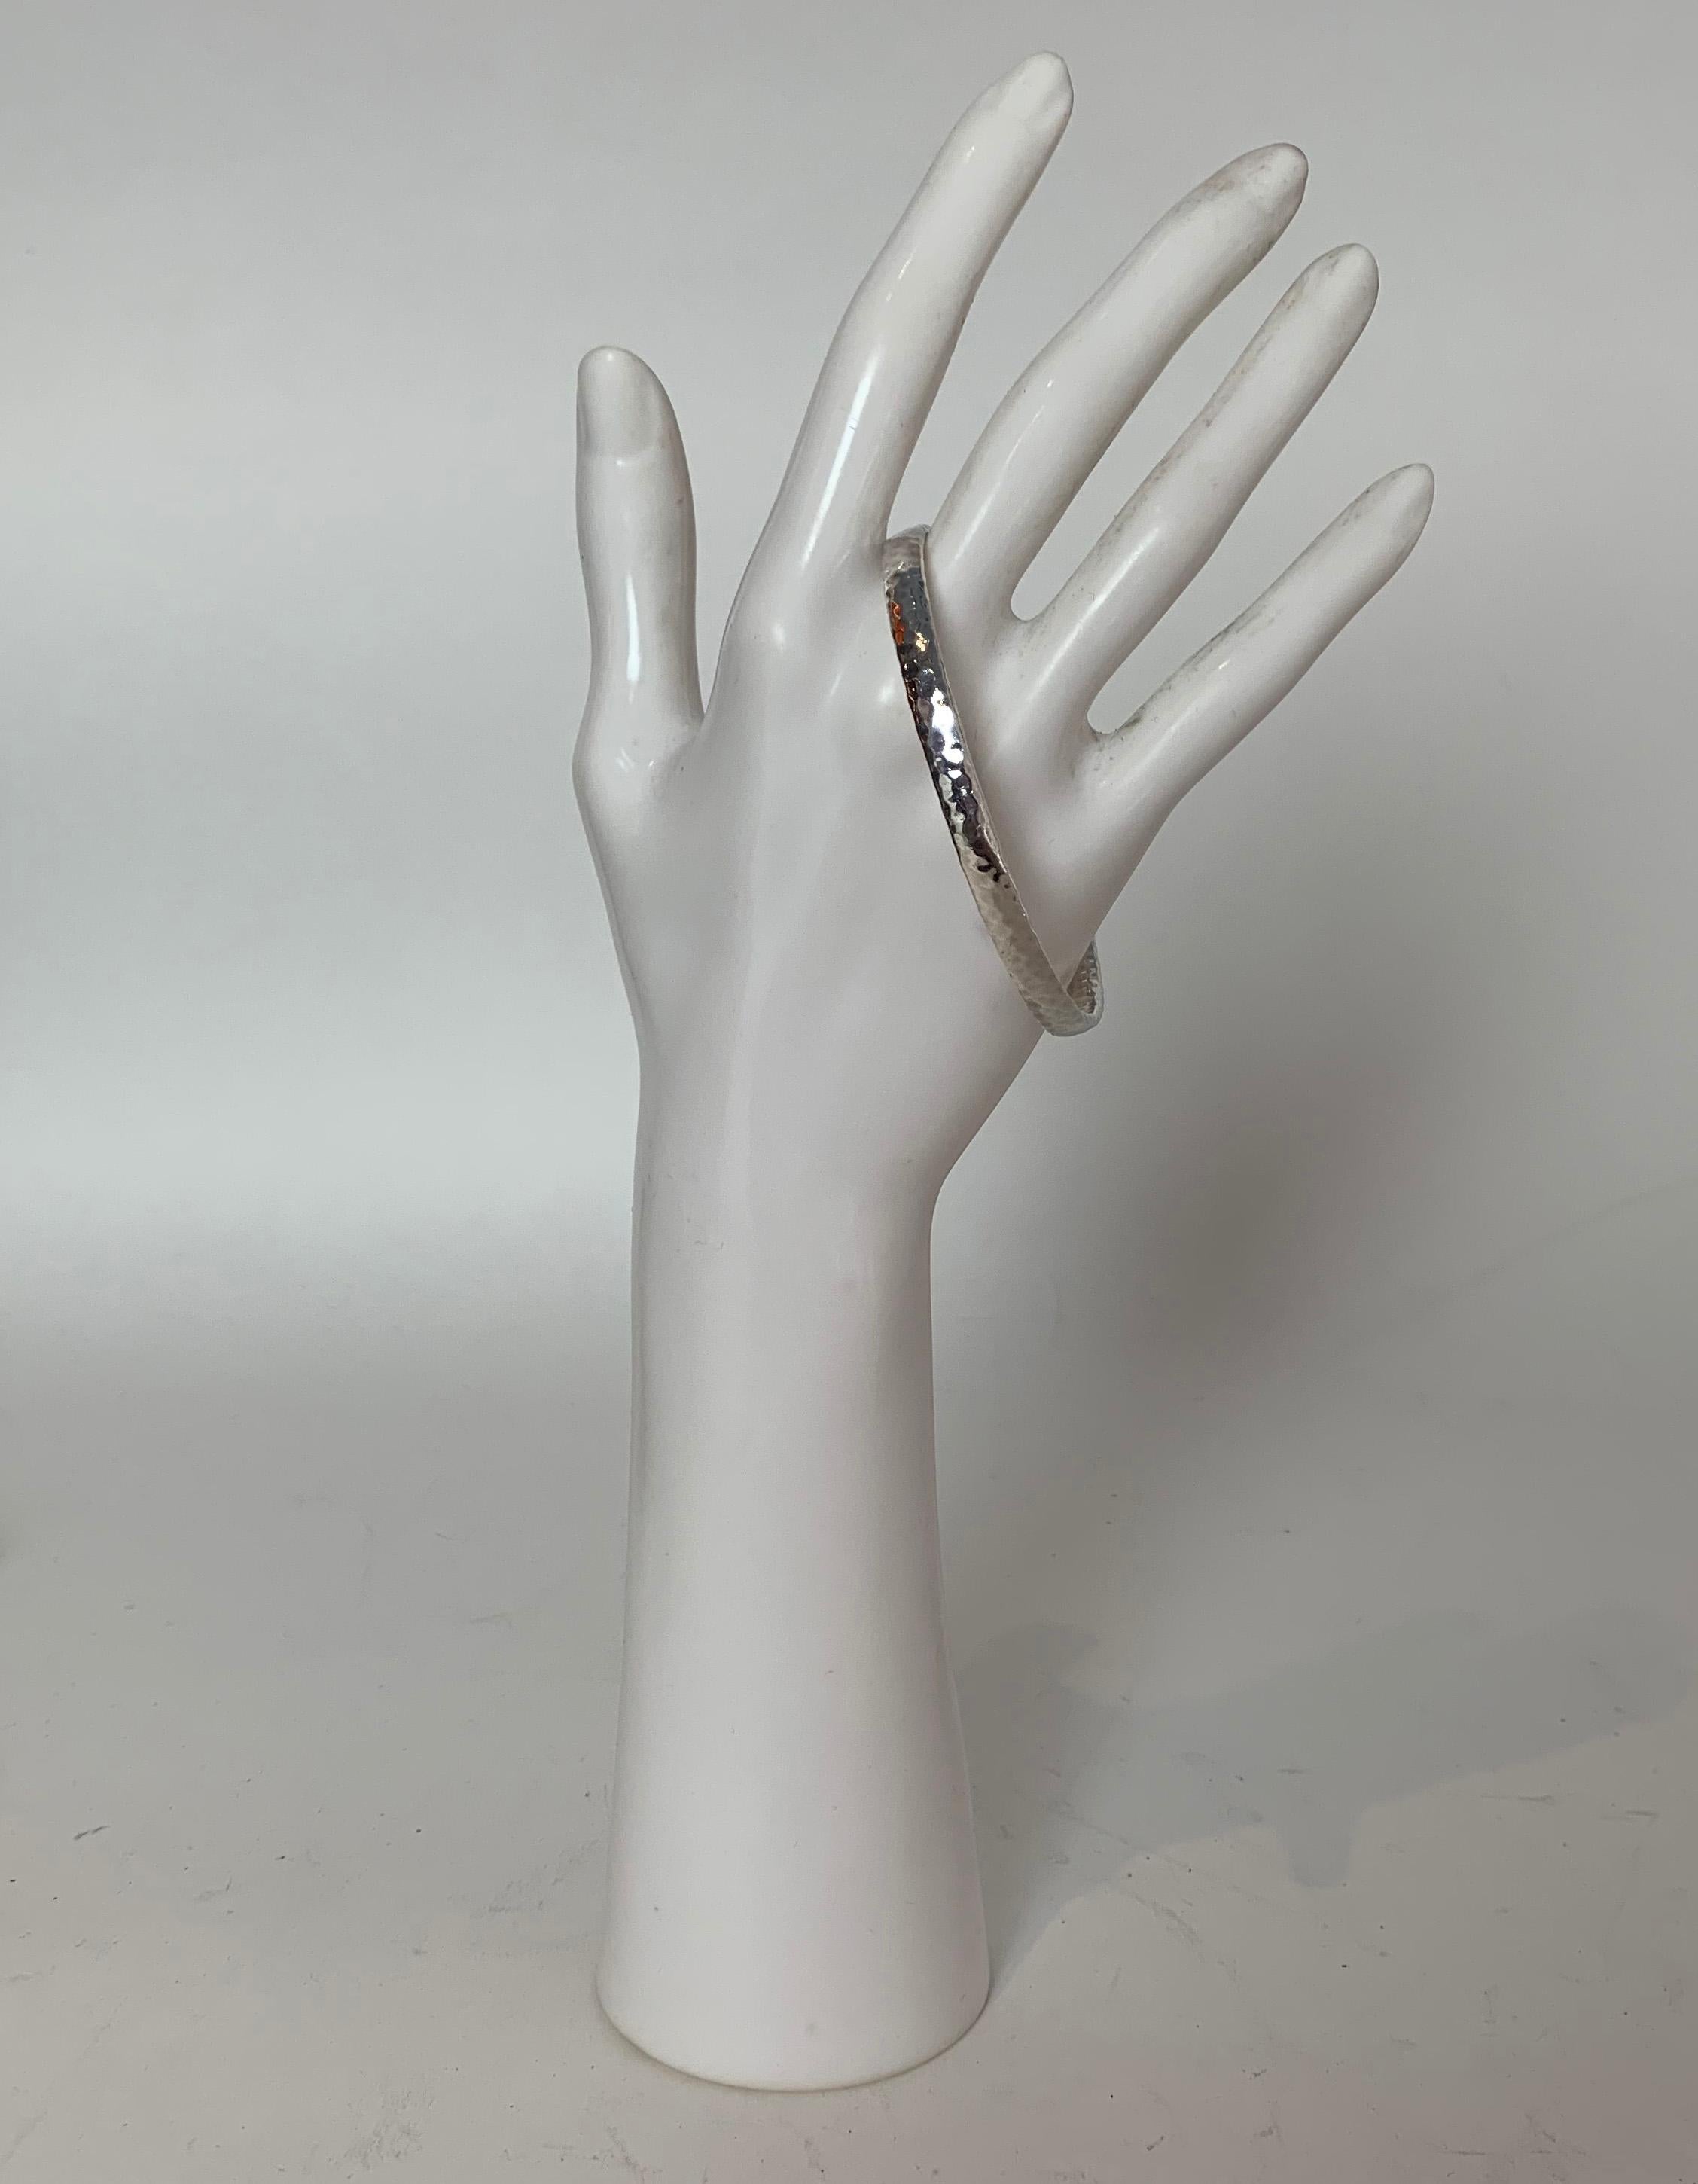 Ippolita Sterling Silver Classico Hammered Flat Bangle Bracelet

Materials: Sterling silver
Hallmarks: IPPOLITA FATTO A MANO
Closure/Opening: Slip on
Overall Condition: Excellent
Estimated Retail: $295 plus tax

Measurements: Ippolita size